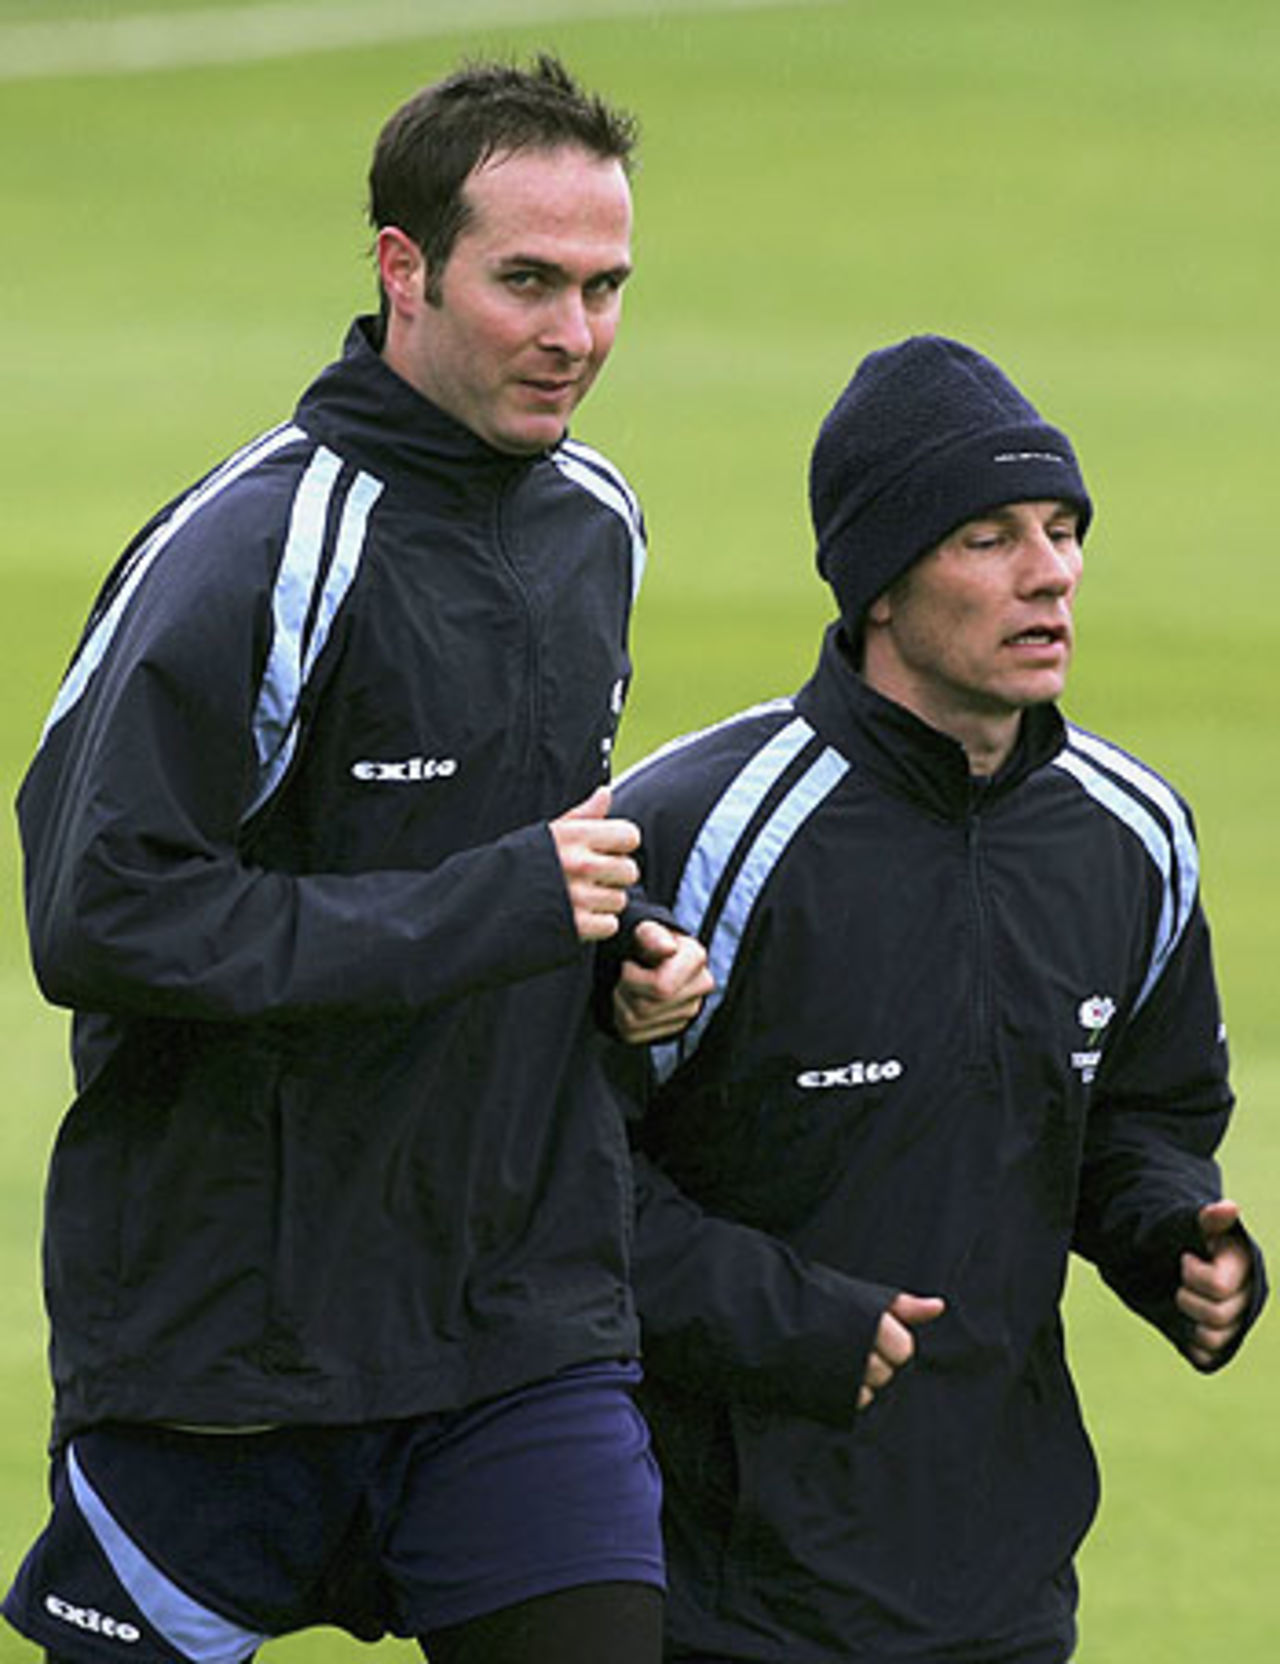 Michael Vaughan and Richard Blakey warm up ahead of Yorkshire's championship clash with Nottinghamshire, April 19, 2006